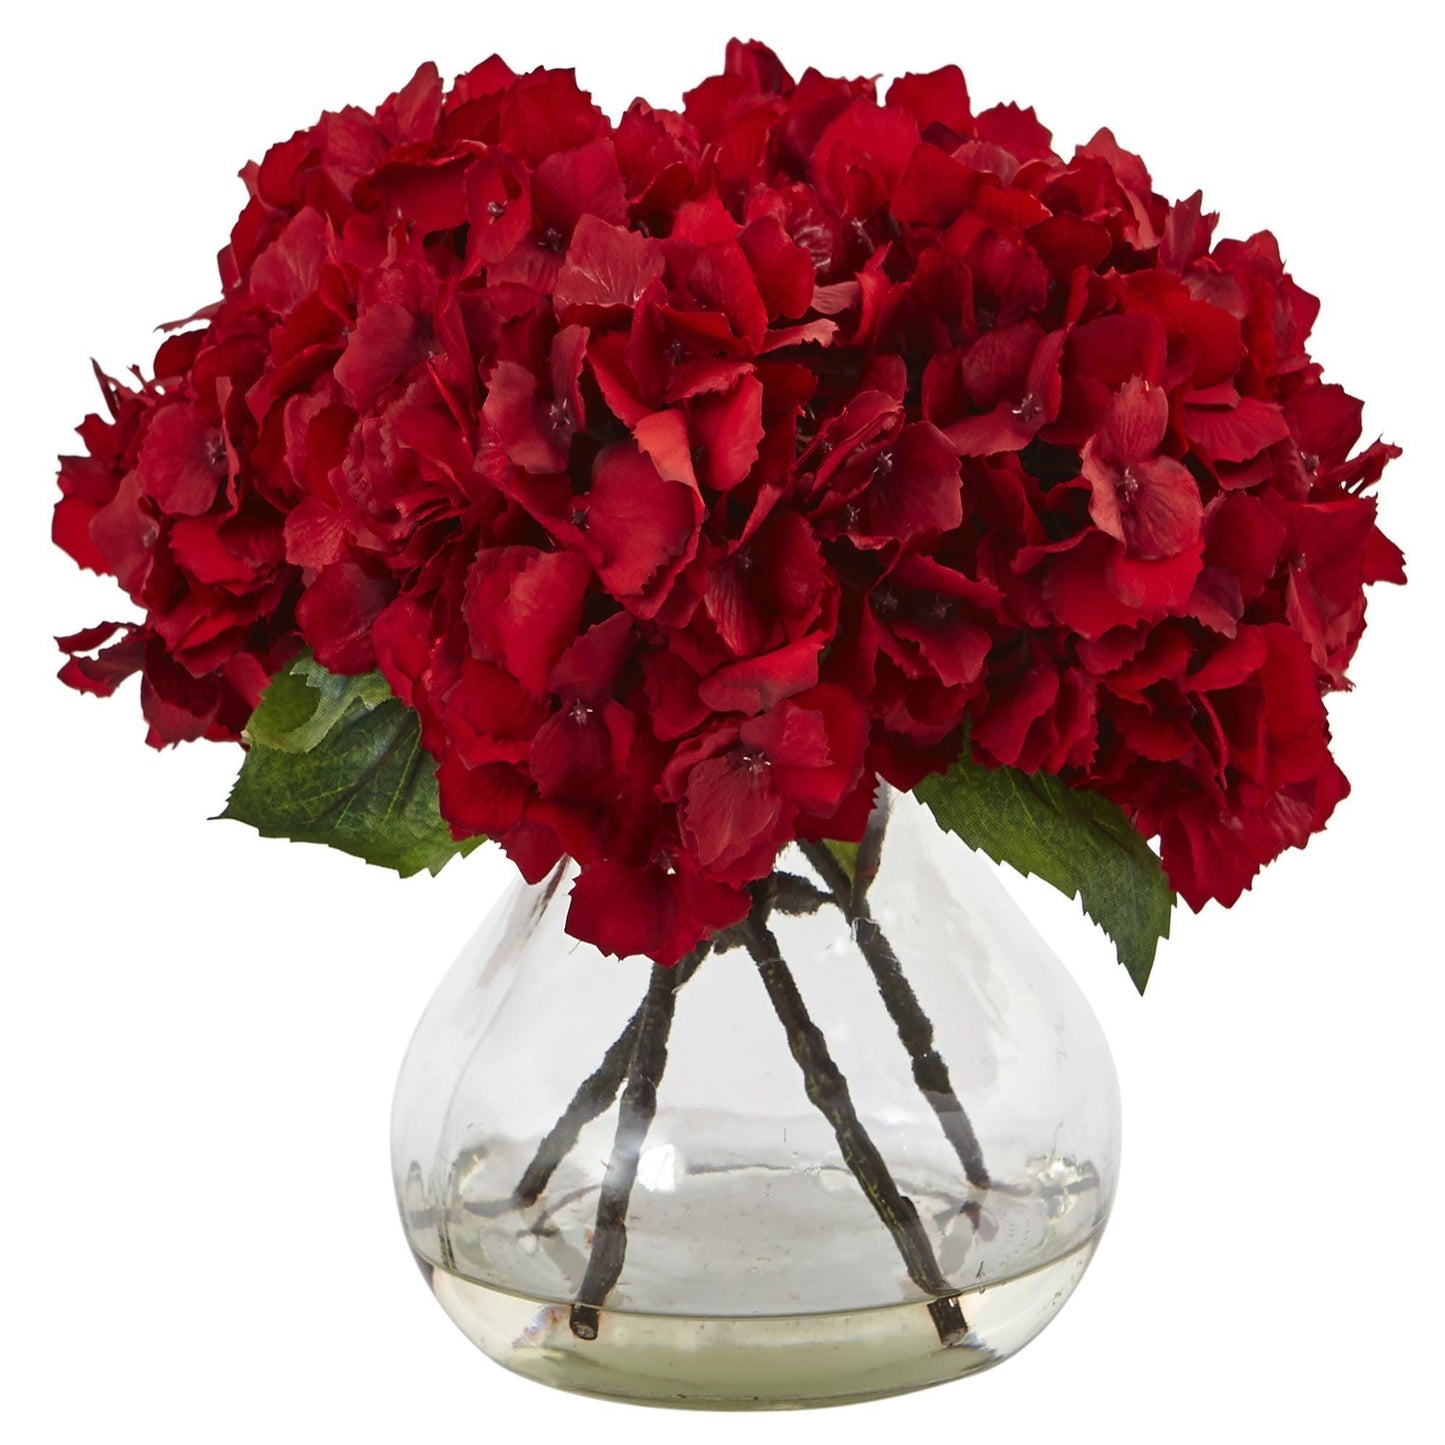 8.5" Artificial Red Hydrangea with Vase Silk Flower Arrangement" by Nearly Natural